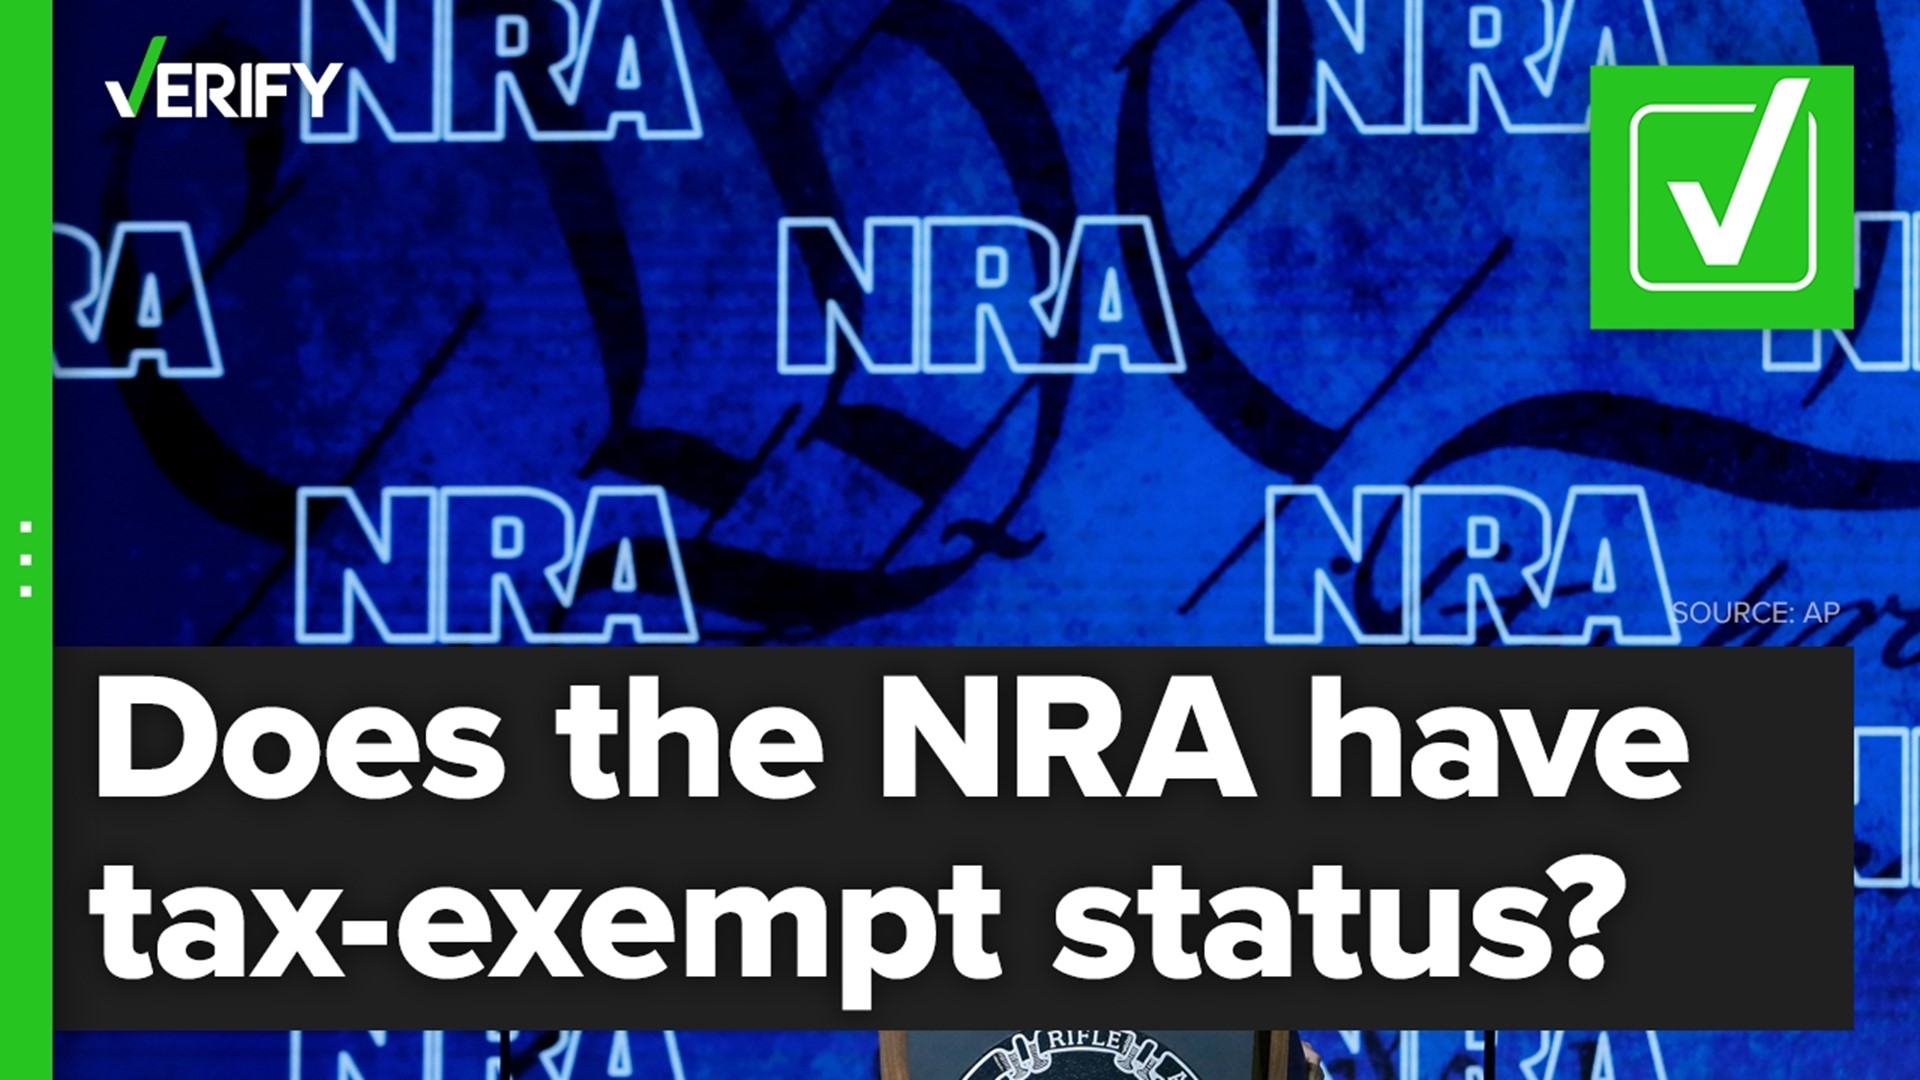 A VERIFY viewer asked if the NRA is tax-exempt. As a 501(c)(4) organization, which is a tax status for “social welfare organizations,” it is.